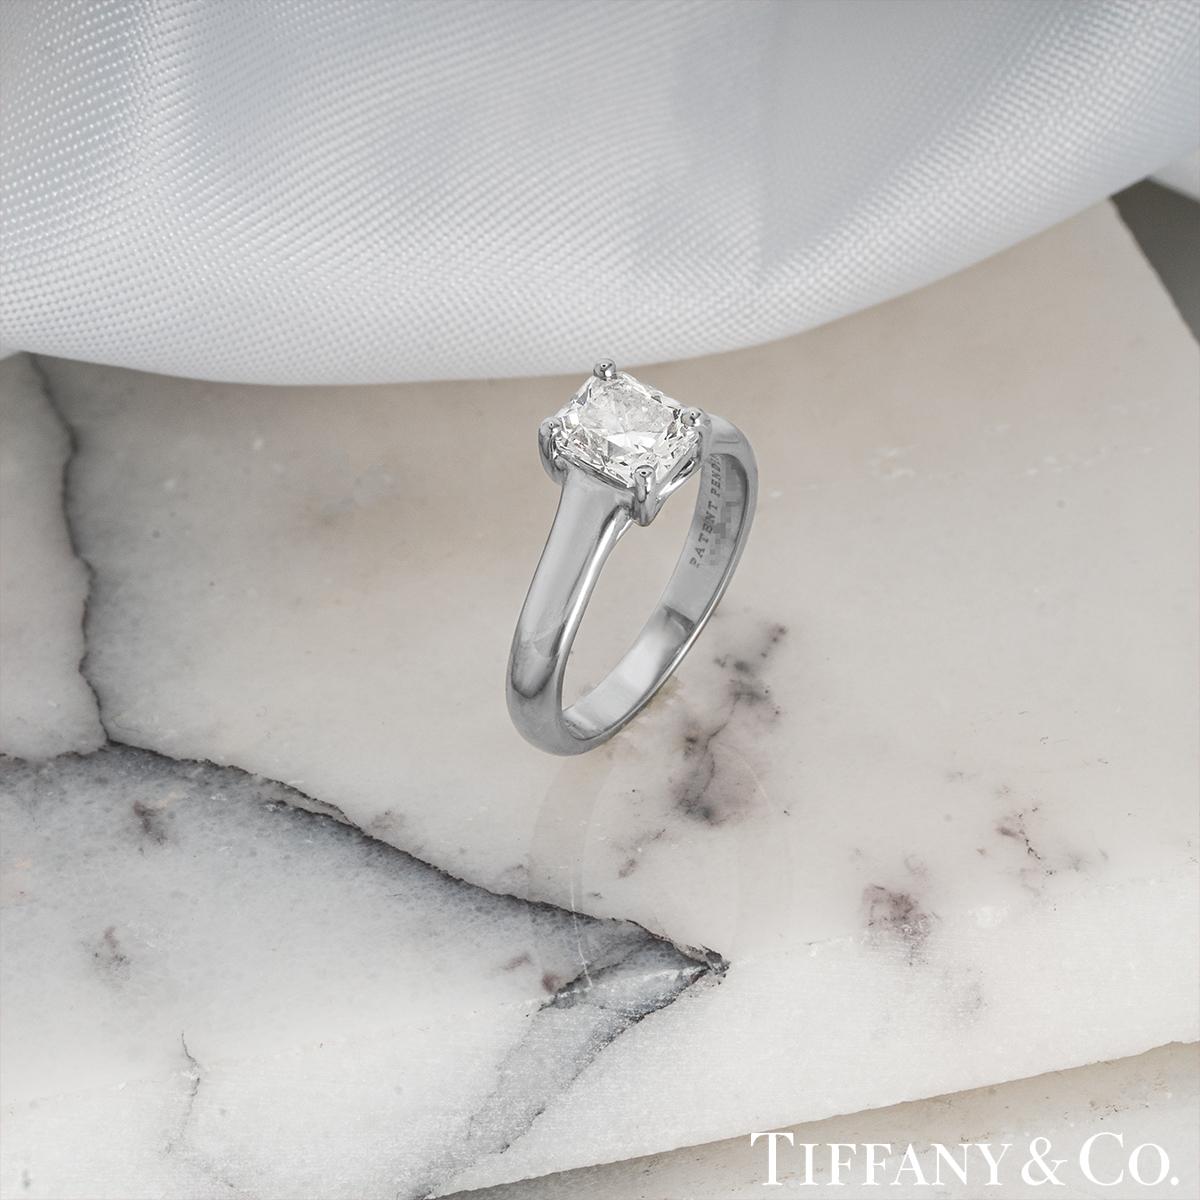 Tiffany & Co. Lucida Cut Diamond Engagement Ring 1.13 Carat/D Color GIA Cert In Excellent Condition For Sale In London, GB